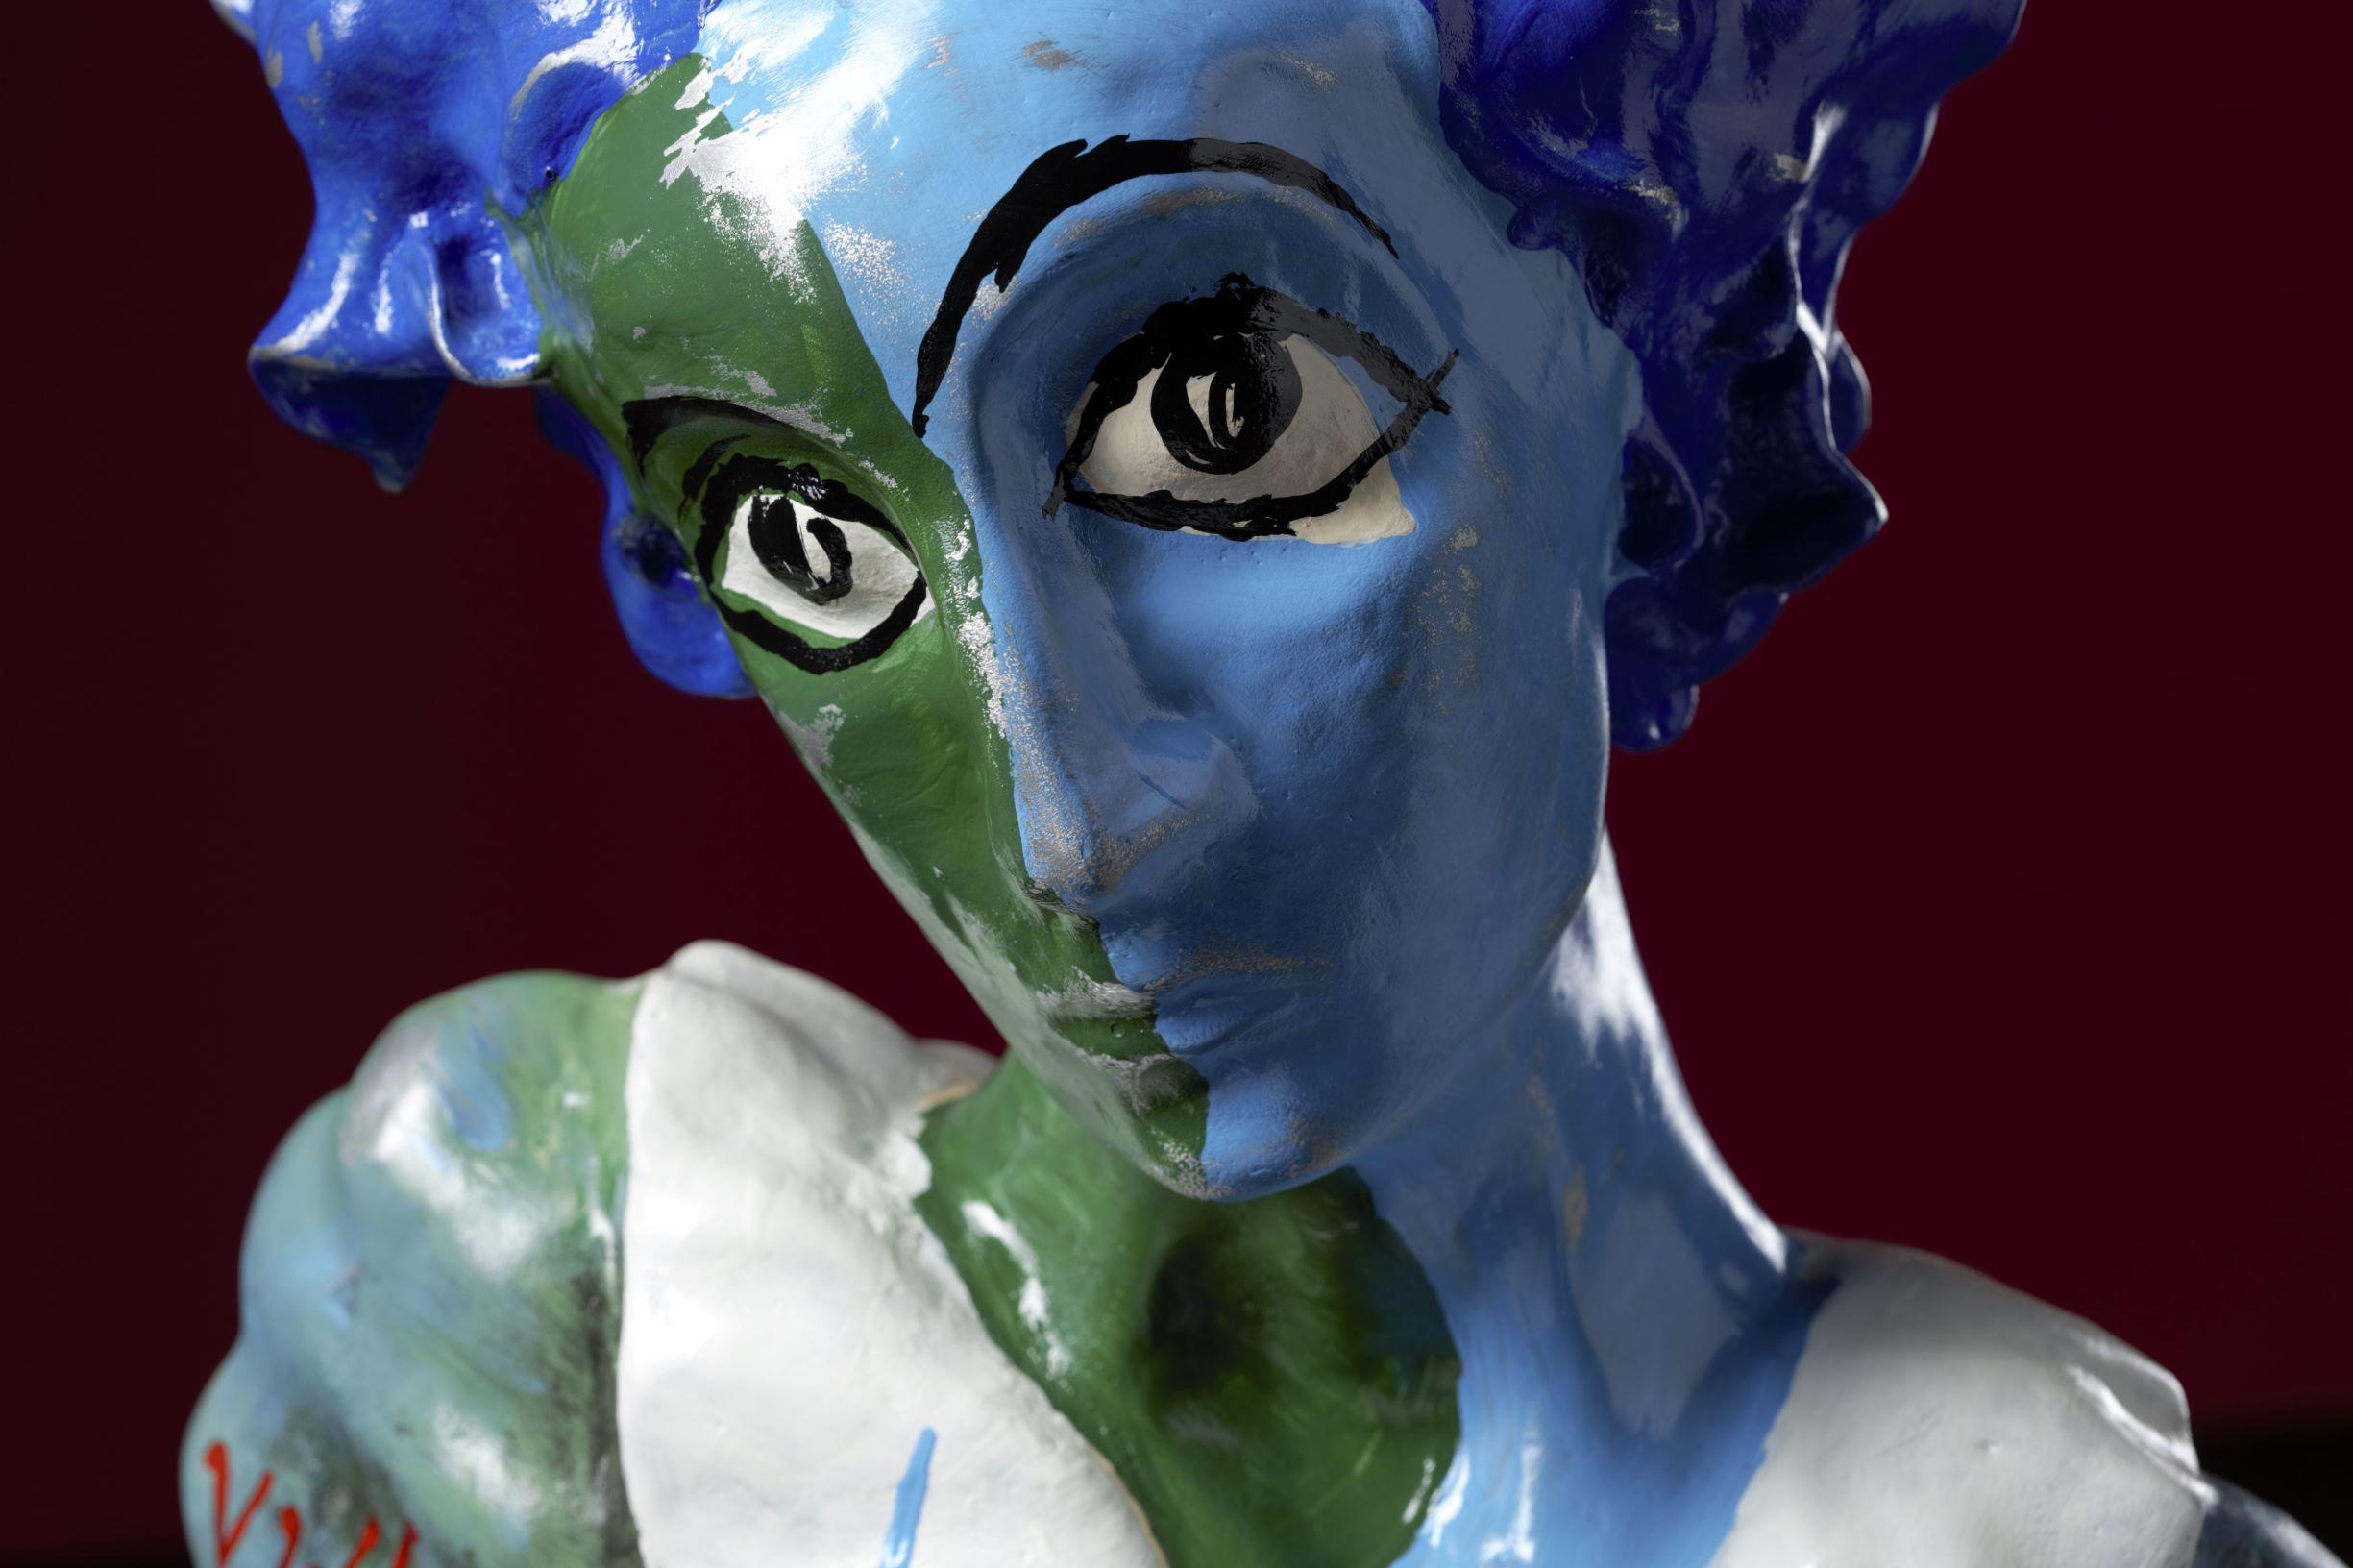 Marc Chagall - Sculpture by Victor Prodanchuk